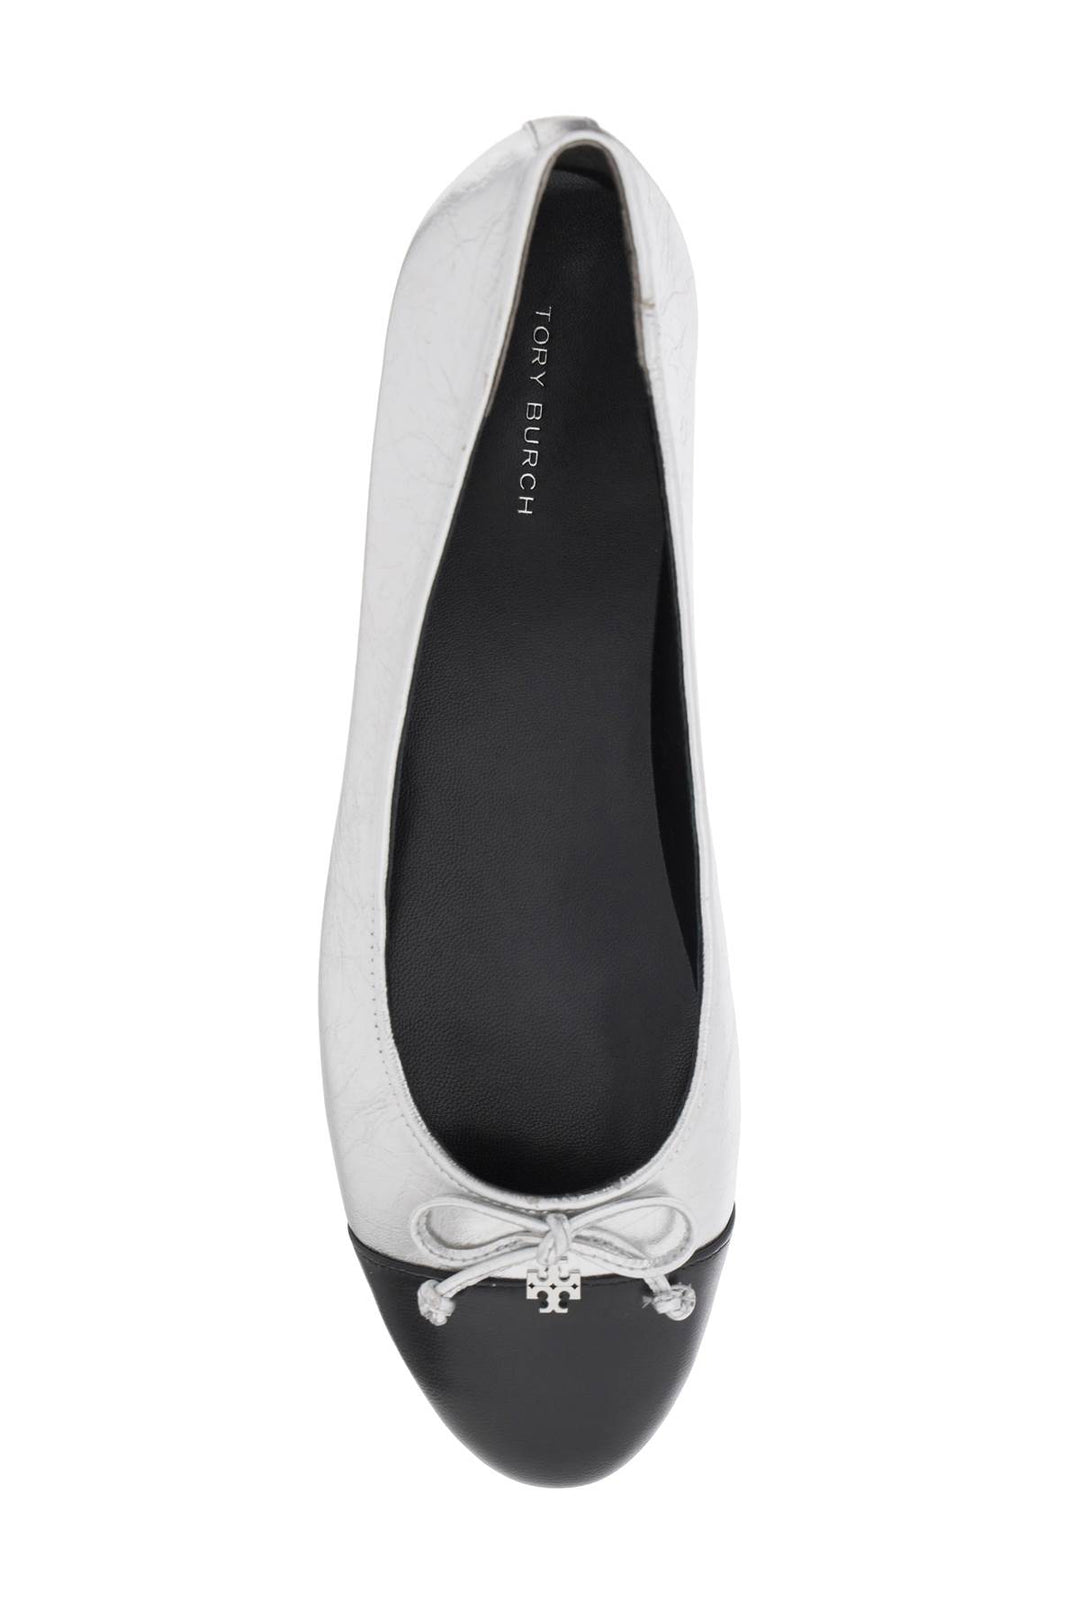 Tory Burch Laminated Ballet Flats With Contrasting Toe   Silver